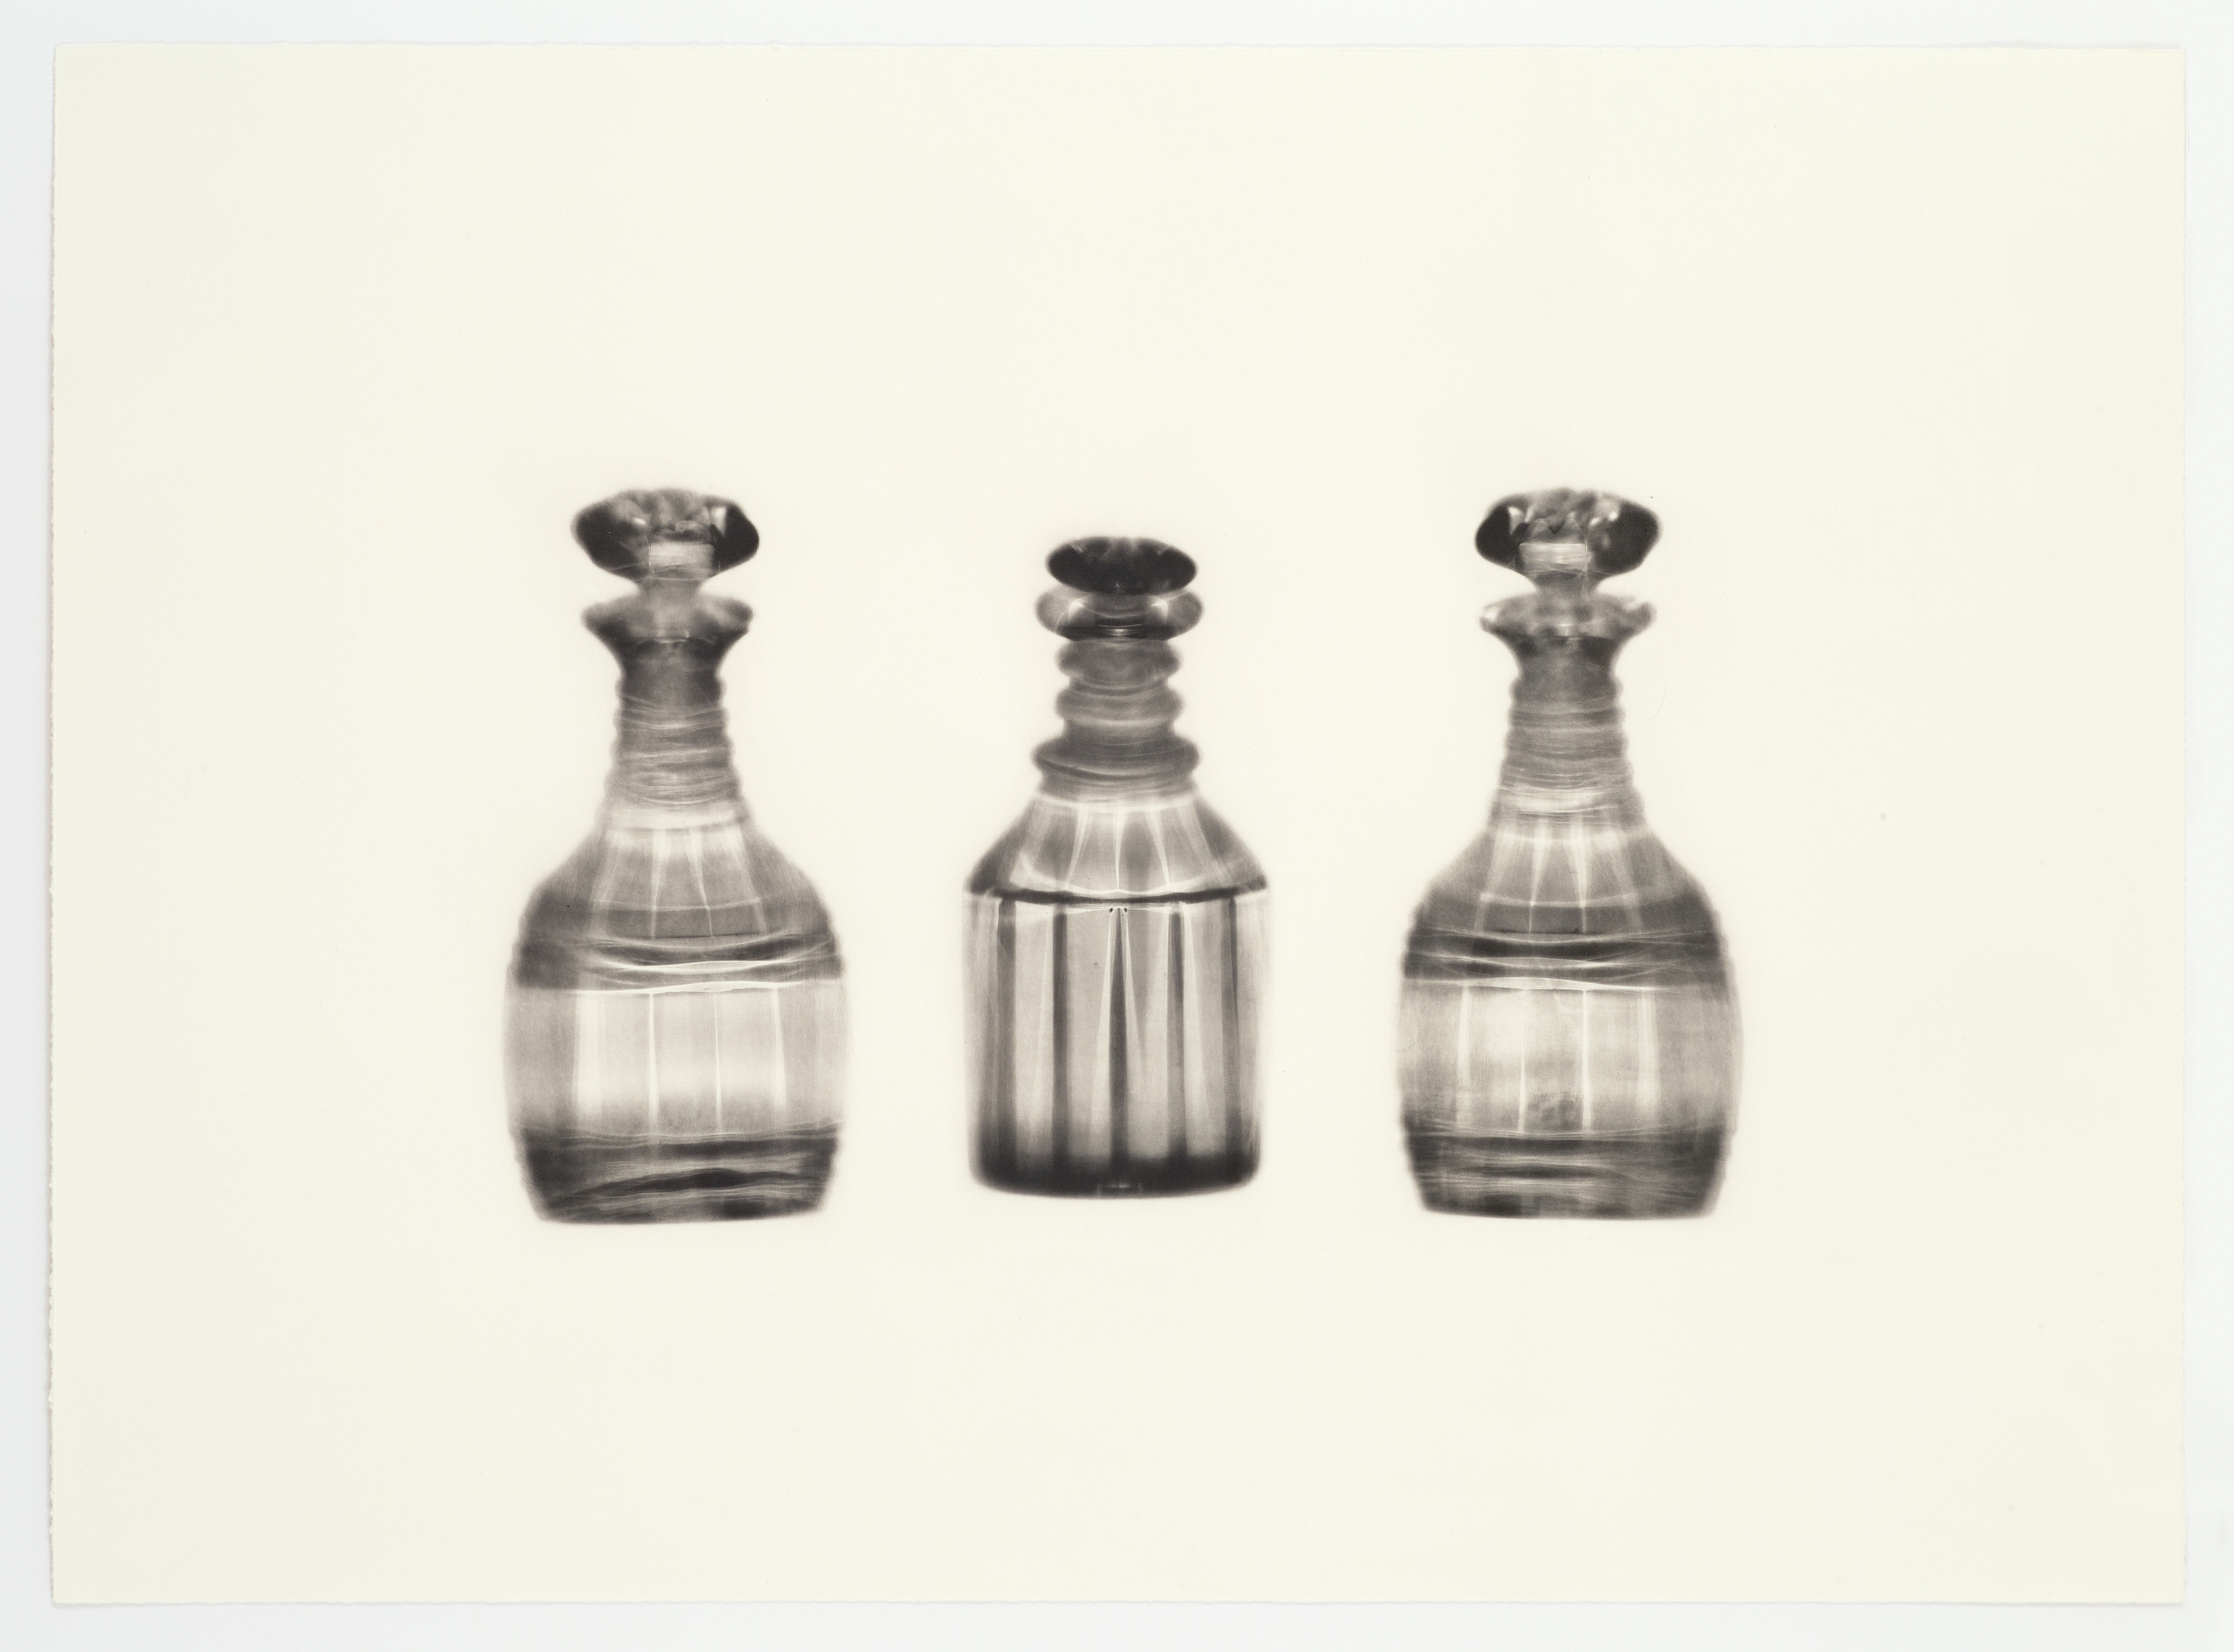 Fox Talbot's Articles of Glass (three decanters) (2017)